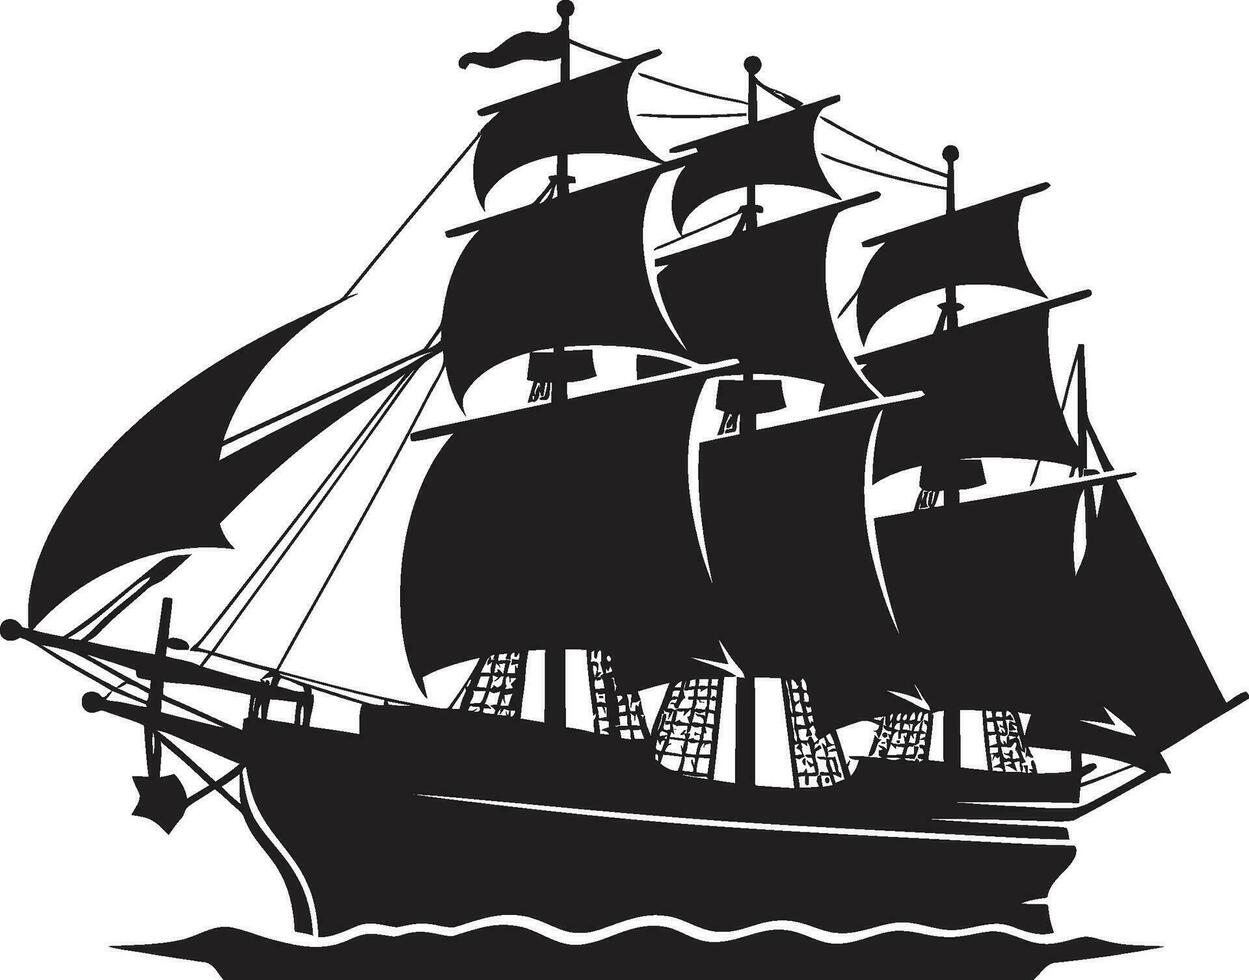 Timeless Vessel Vector Ancient Ship Maritime Legacy Black Ship Icon Design